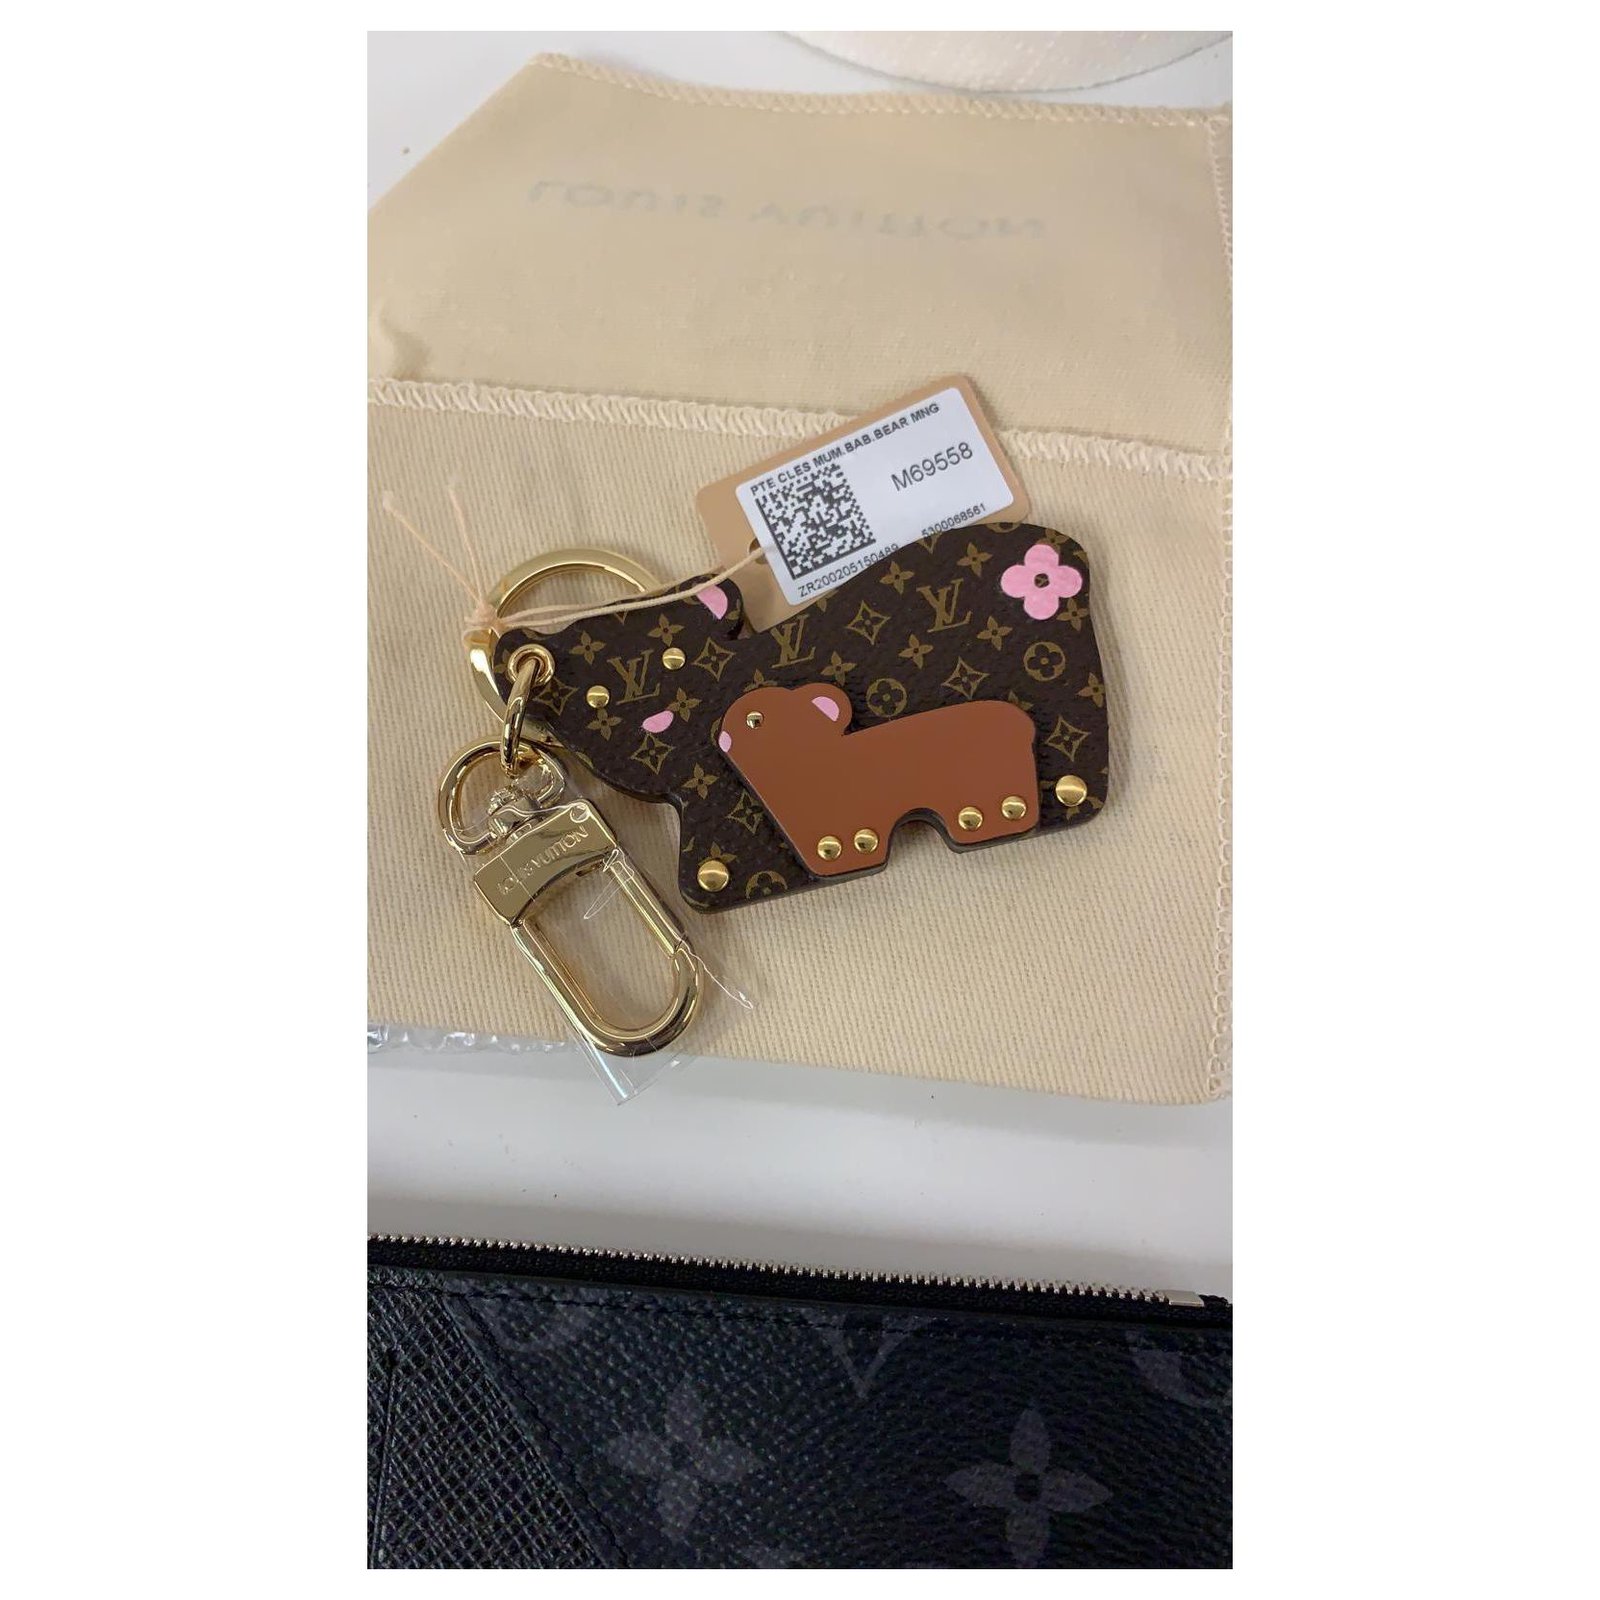 Leather bag charm Louis Vuitton Camel in Leather - 17090030